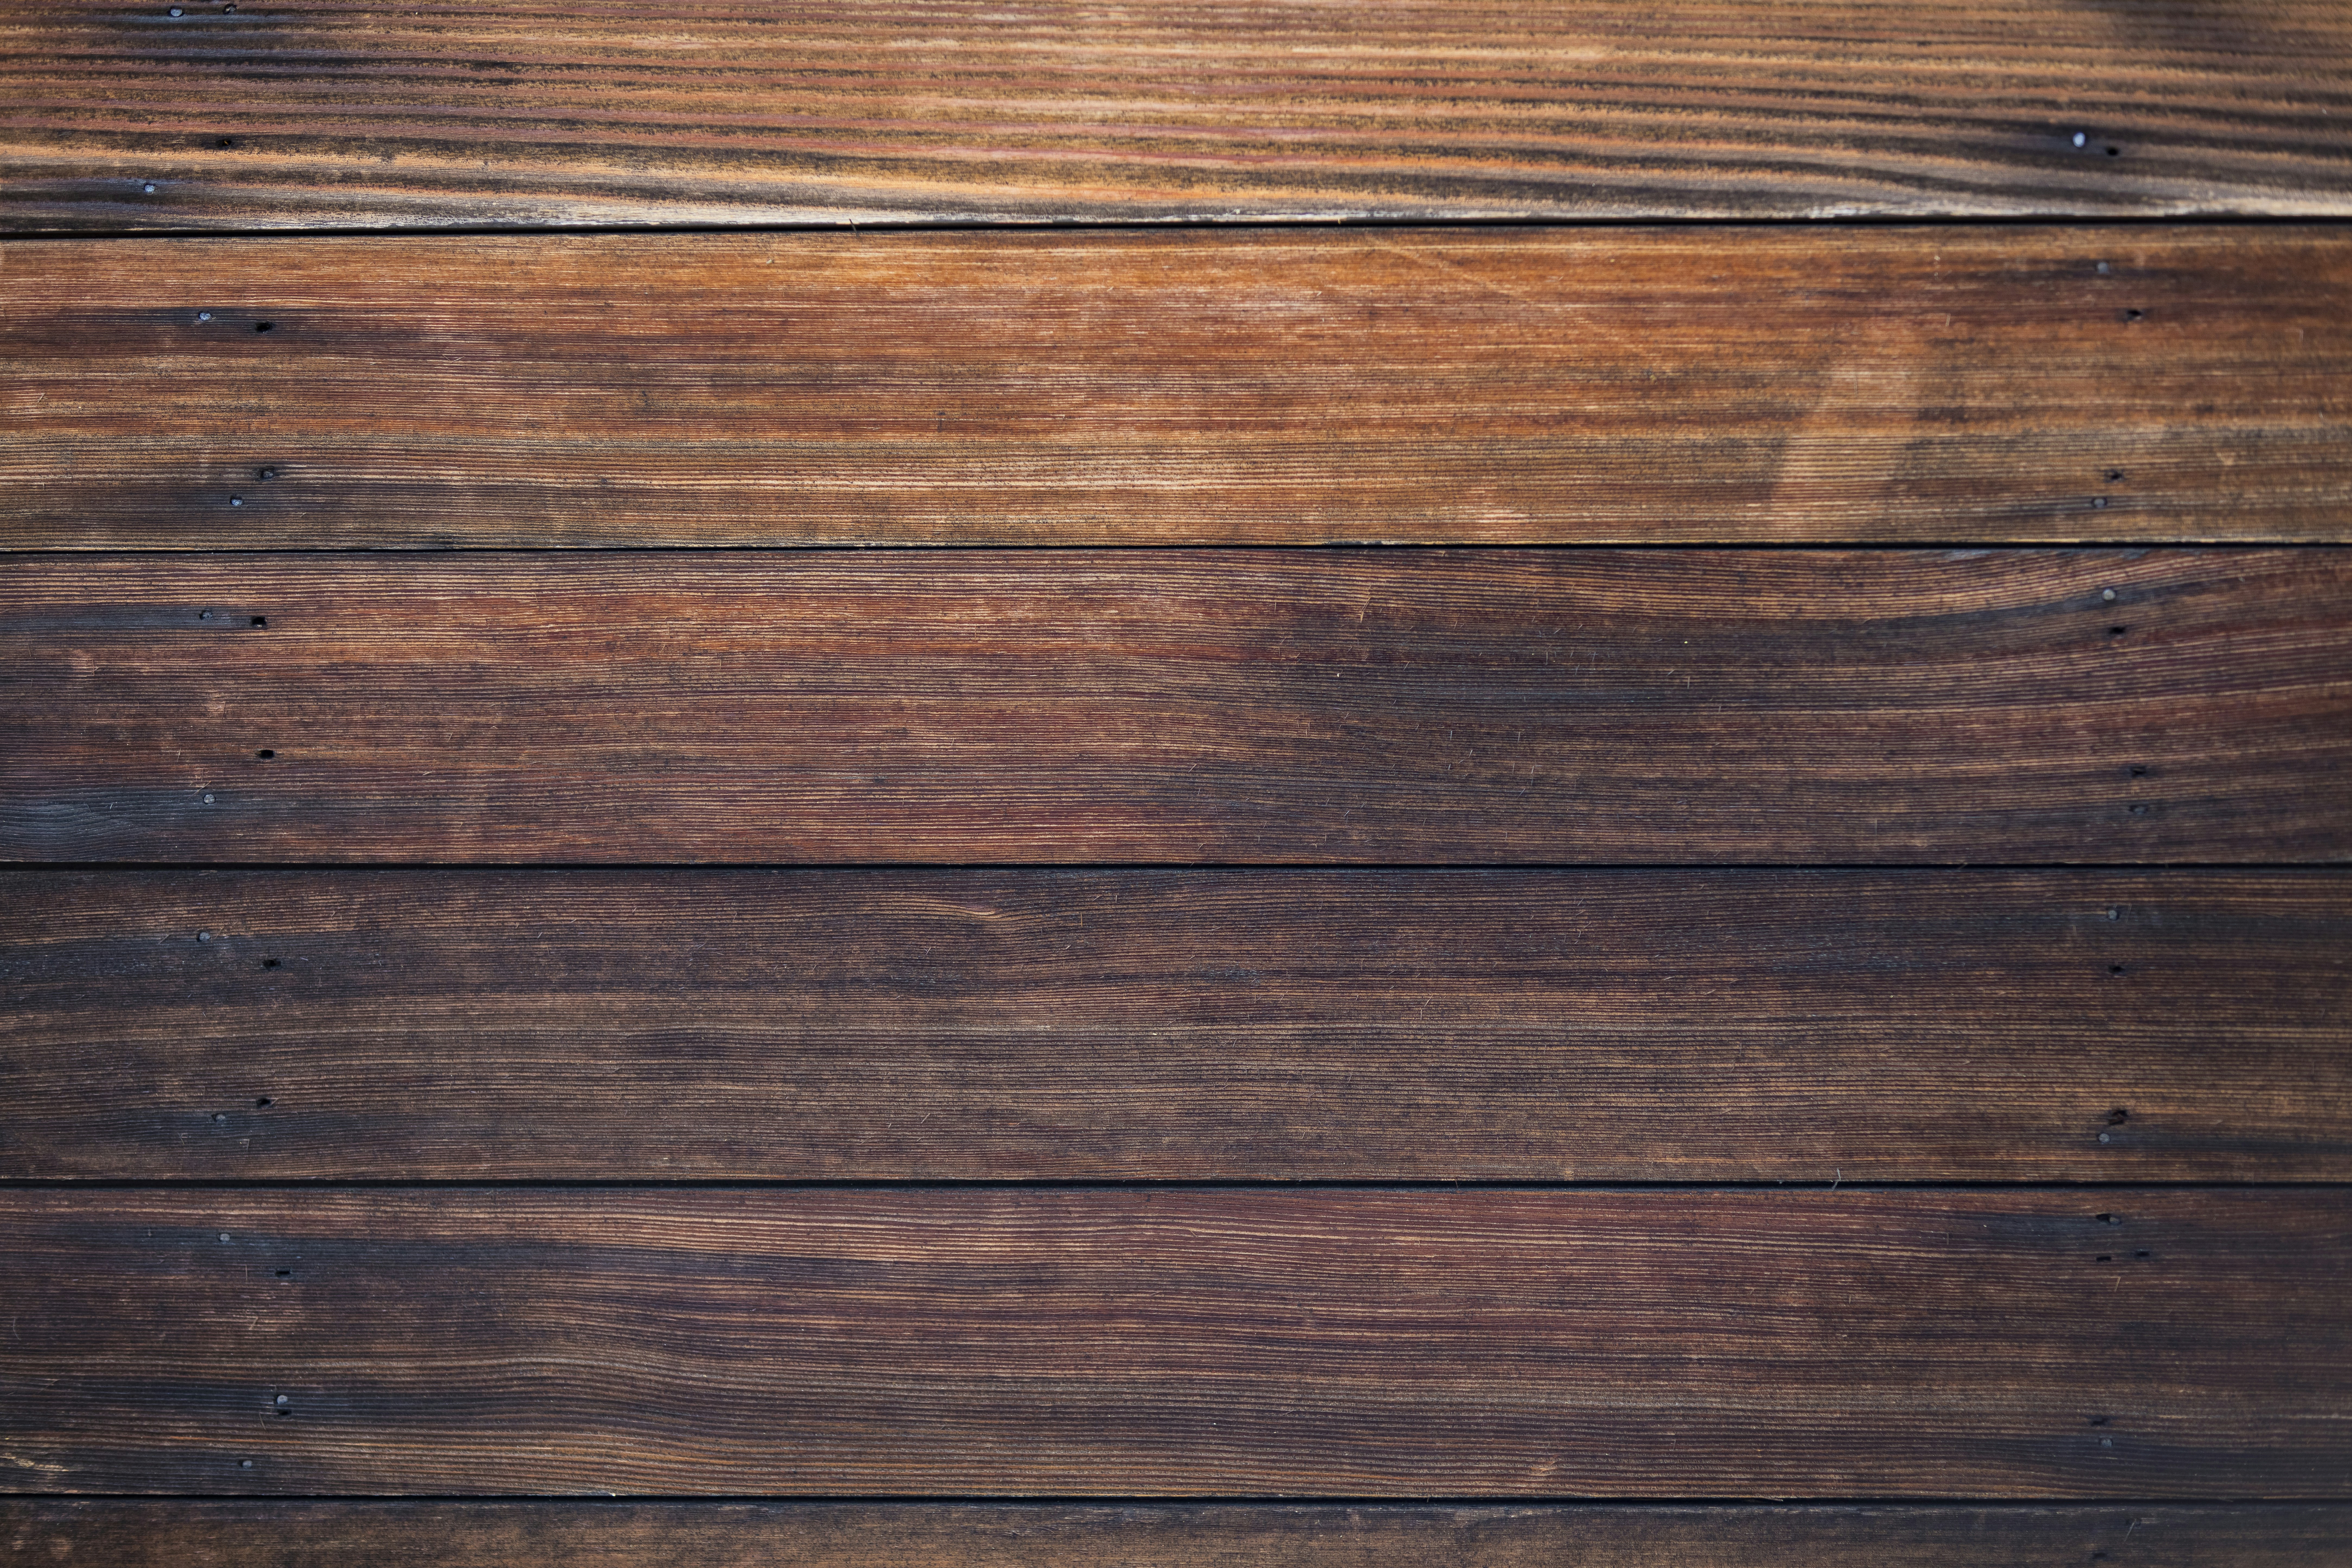 Choose from a curated selection of wood wallpapers for your mobile and desktop screens. Always free on Unsplash.